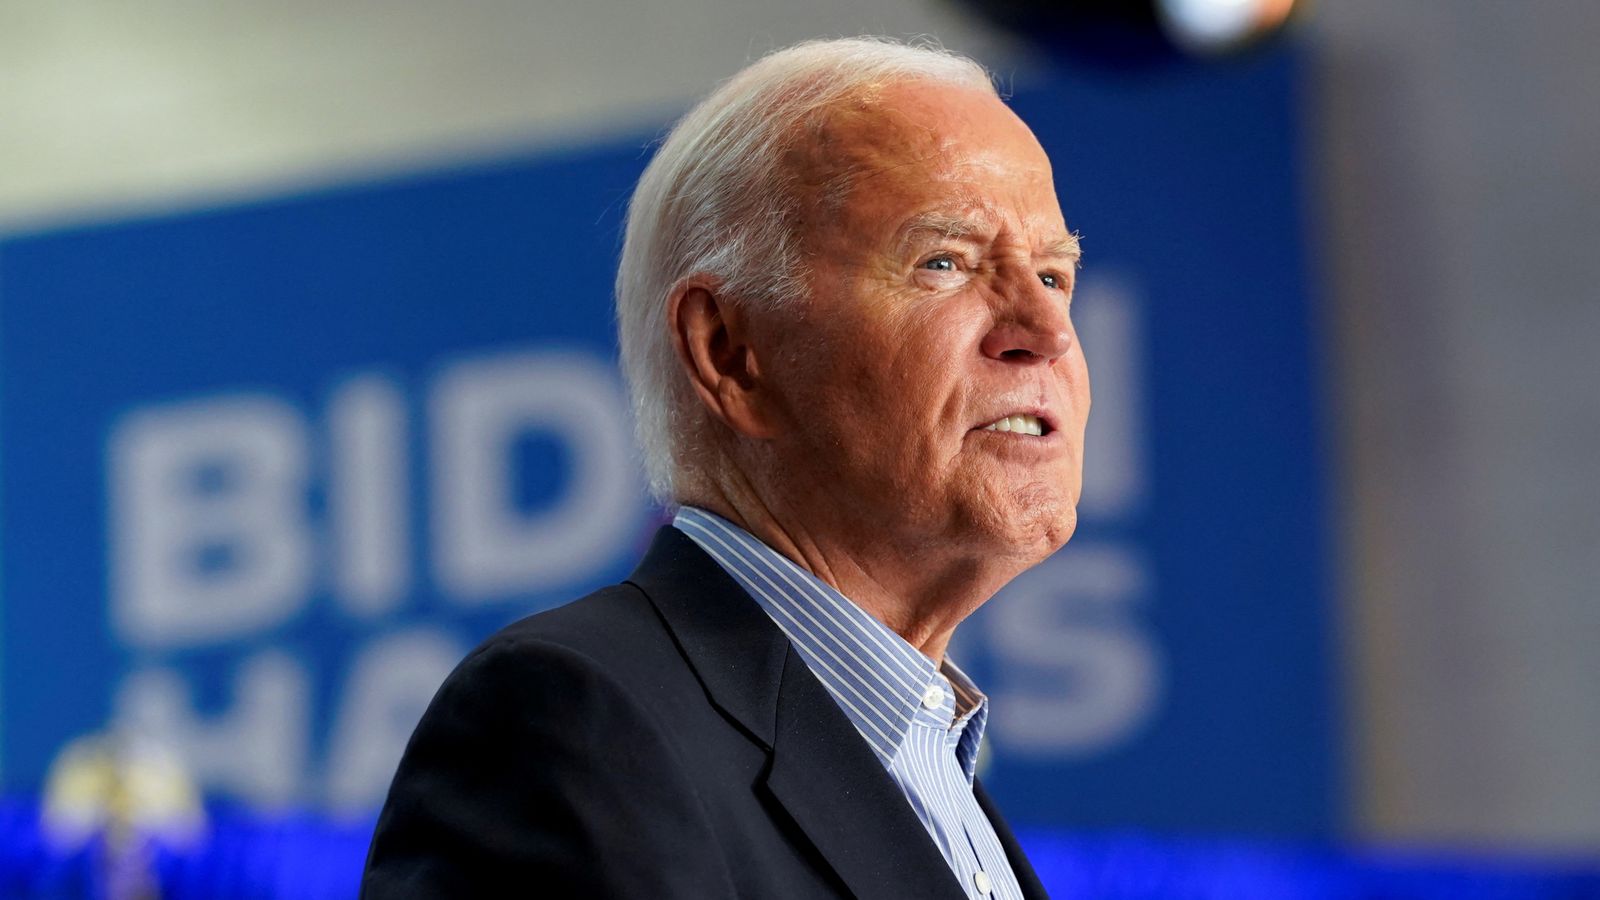 Joe Biden vows 'I'm staying in the race' amid speculation over his future